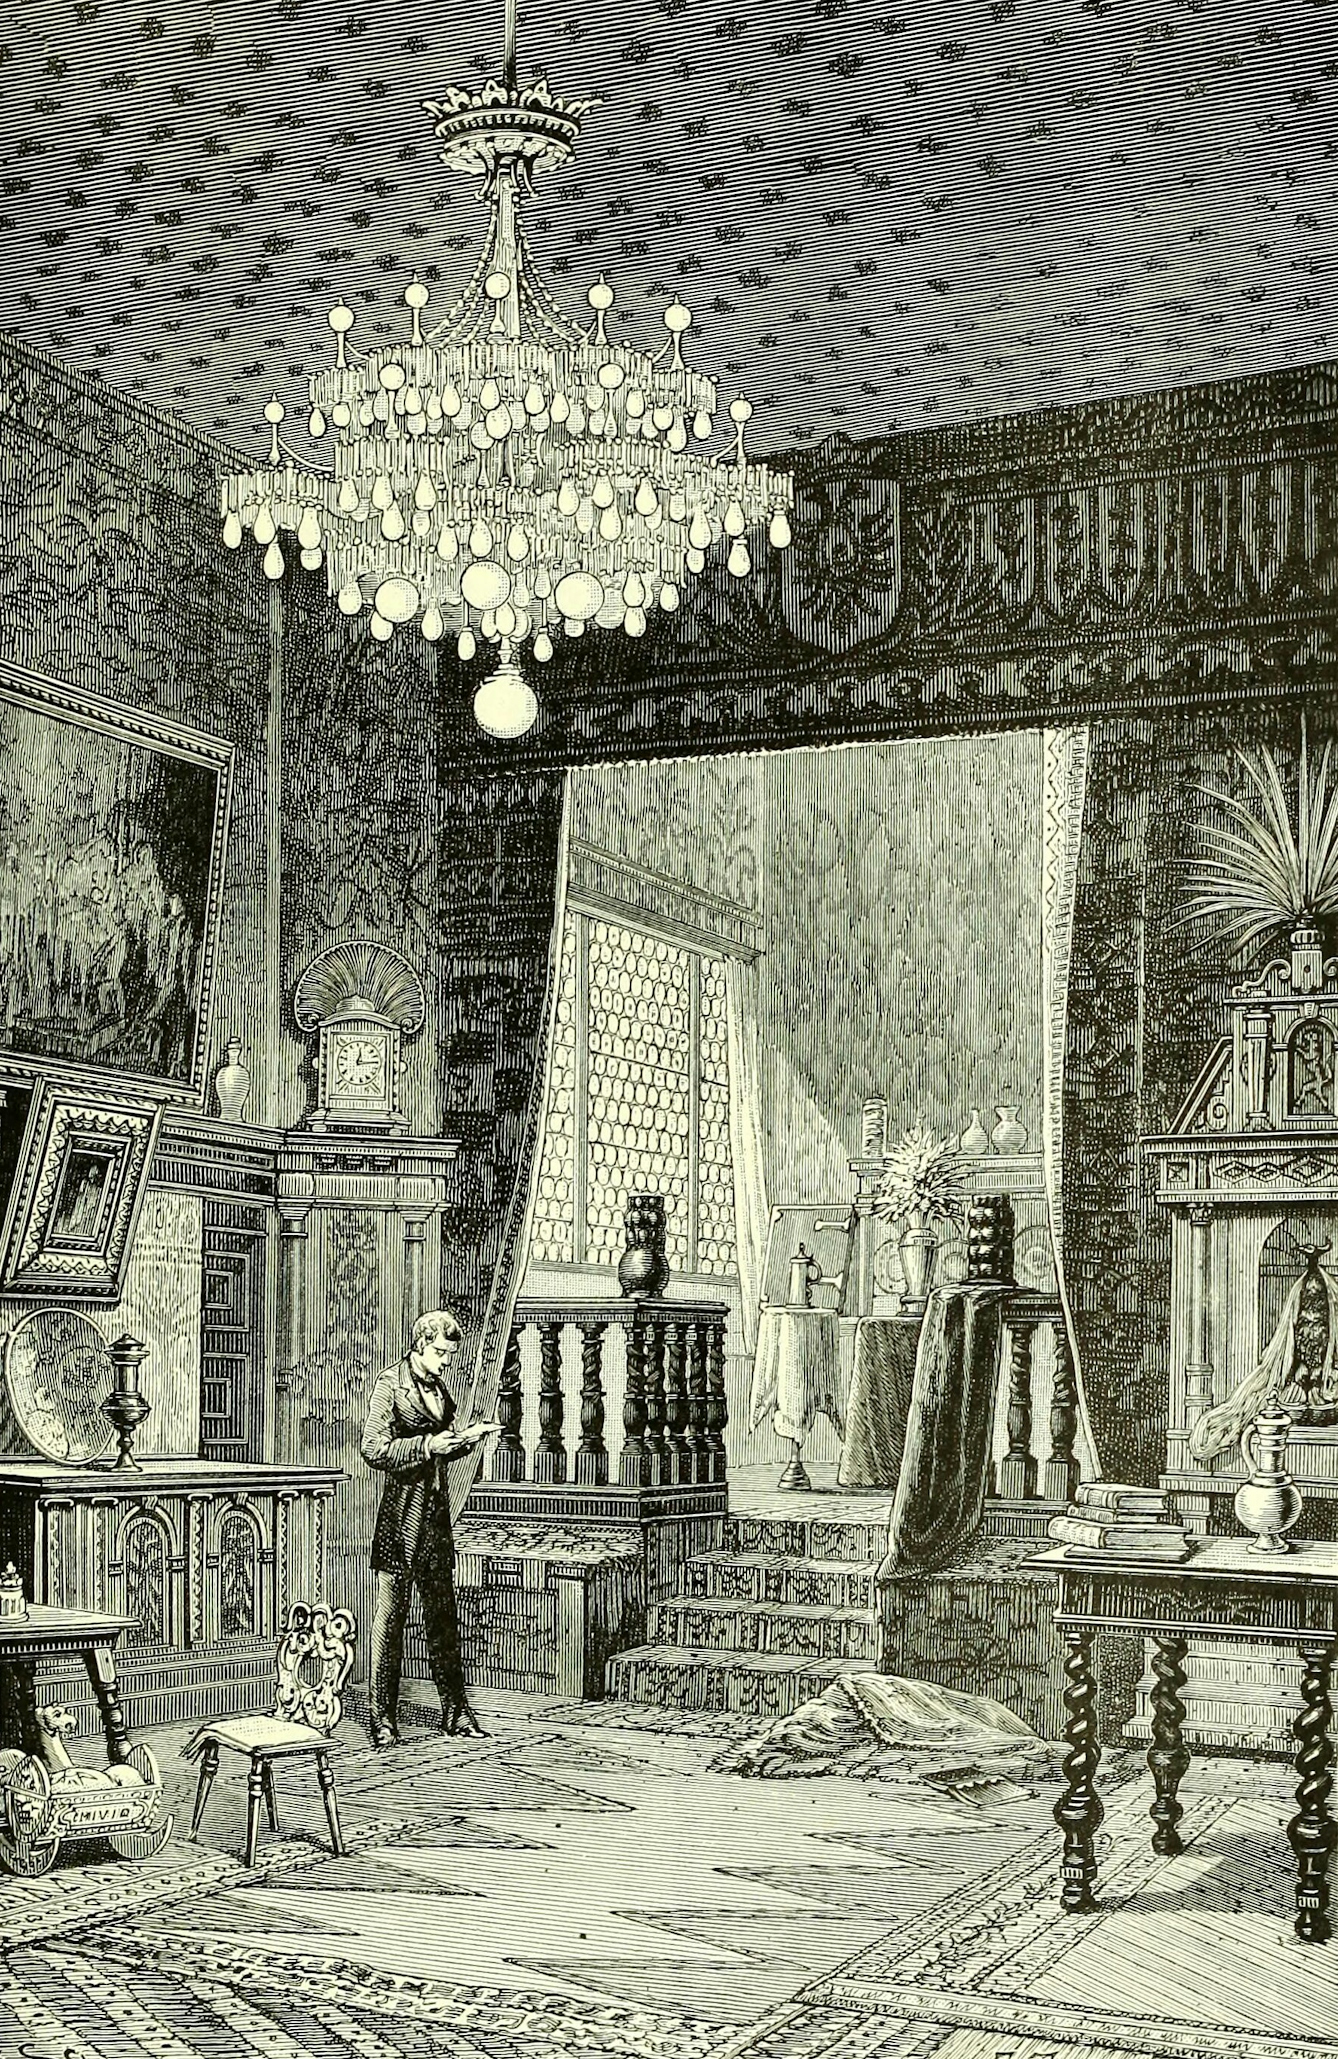 Incandescent lamps were preferred in galleries, displaying valuable objects, as cleaner and safer sources of illumination than gas lamps.